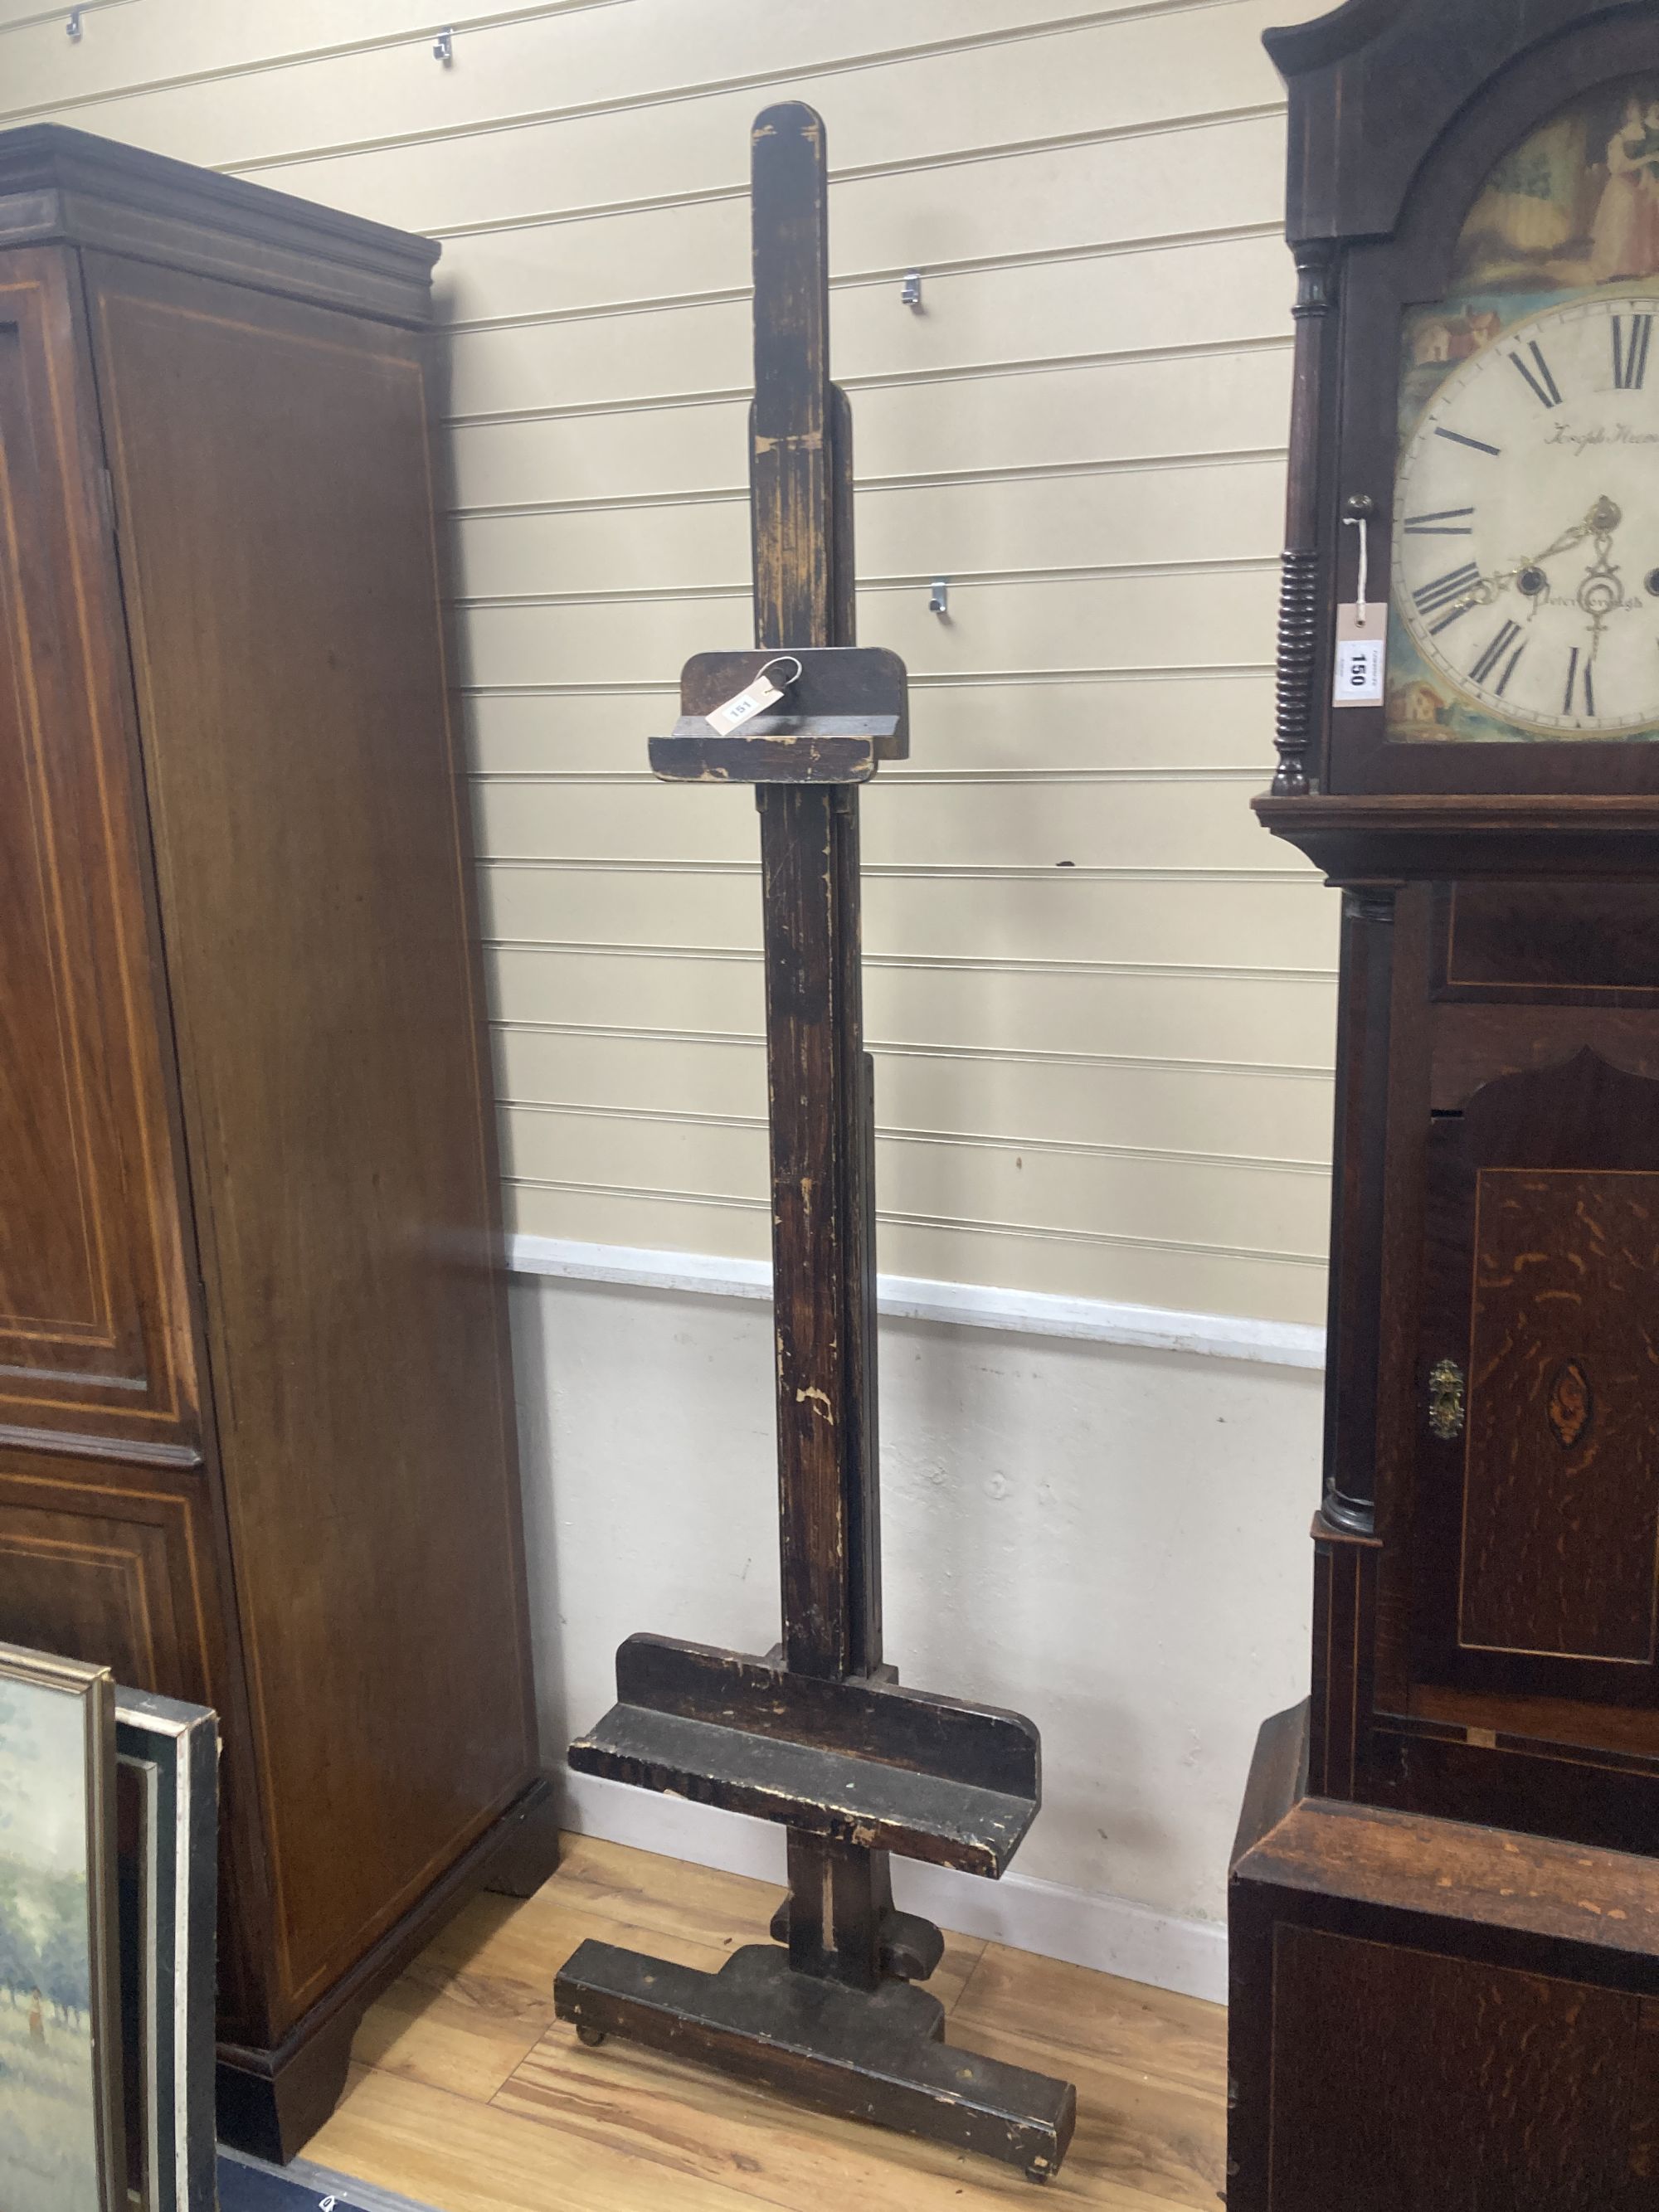 An early 20th century artist's studio easel, height 205cmCONDITION: It is sturdy and its